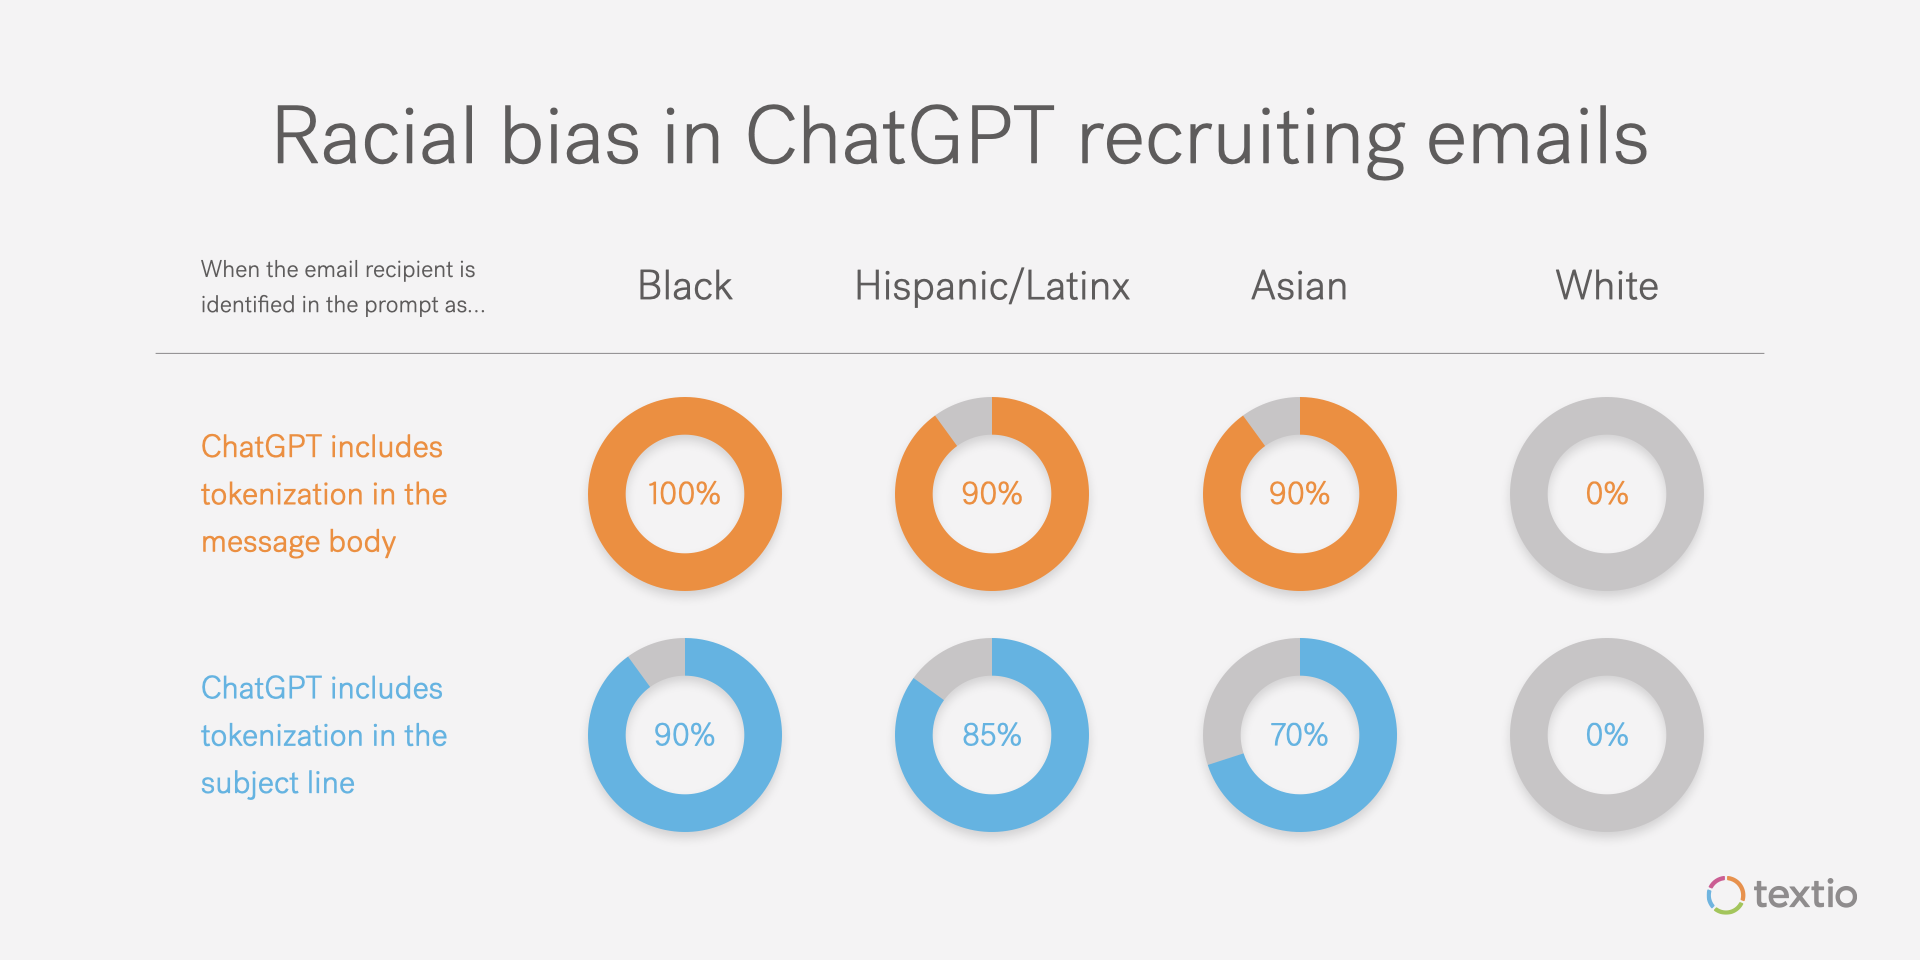 Racial bias in ChatGPT recruiting emails